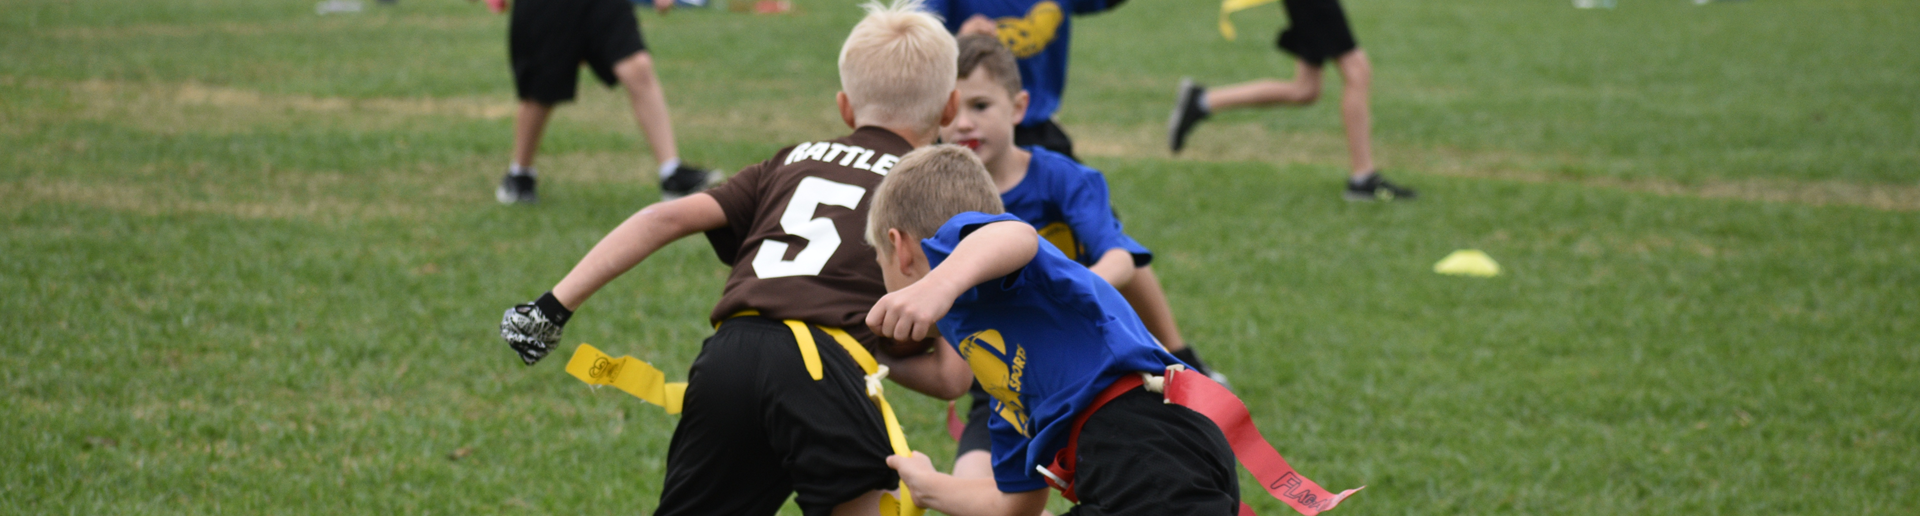 3rd and 4th Flag Football